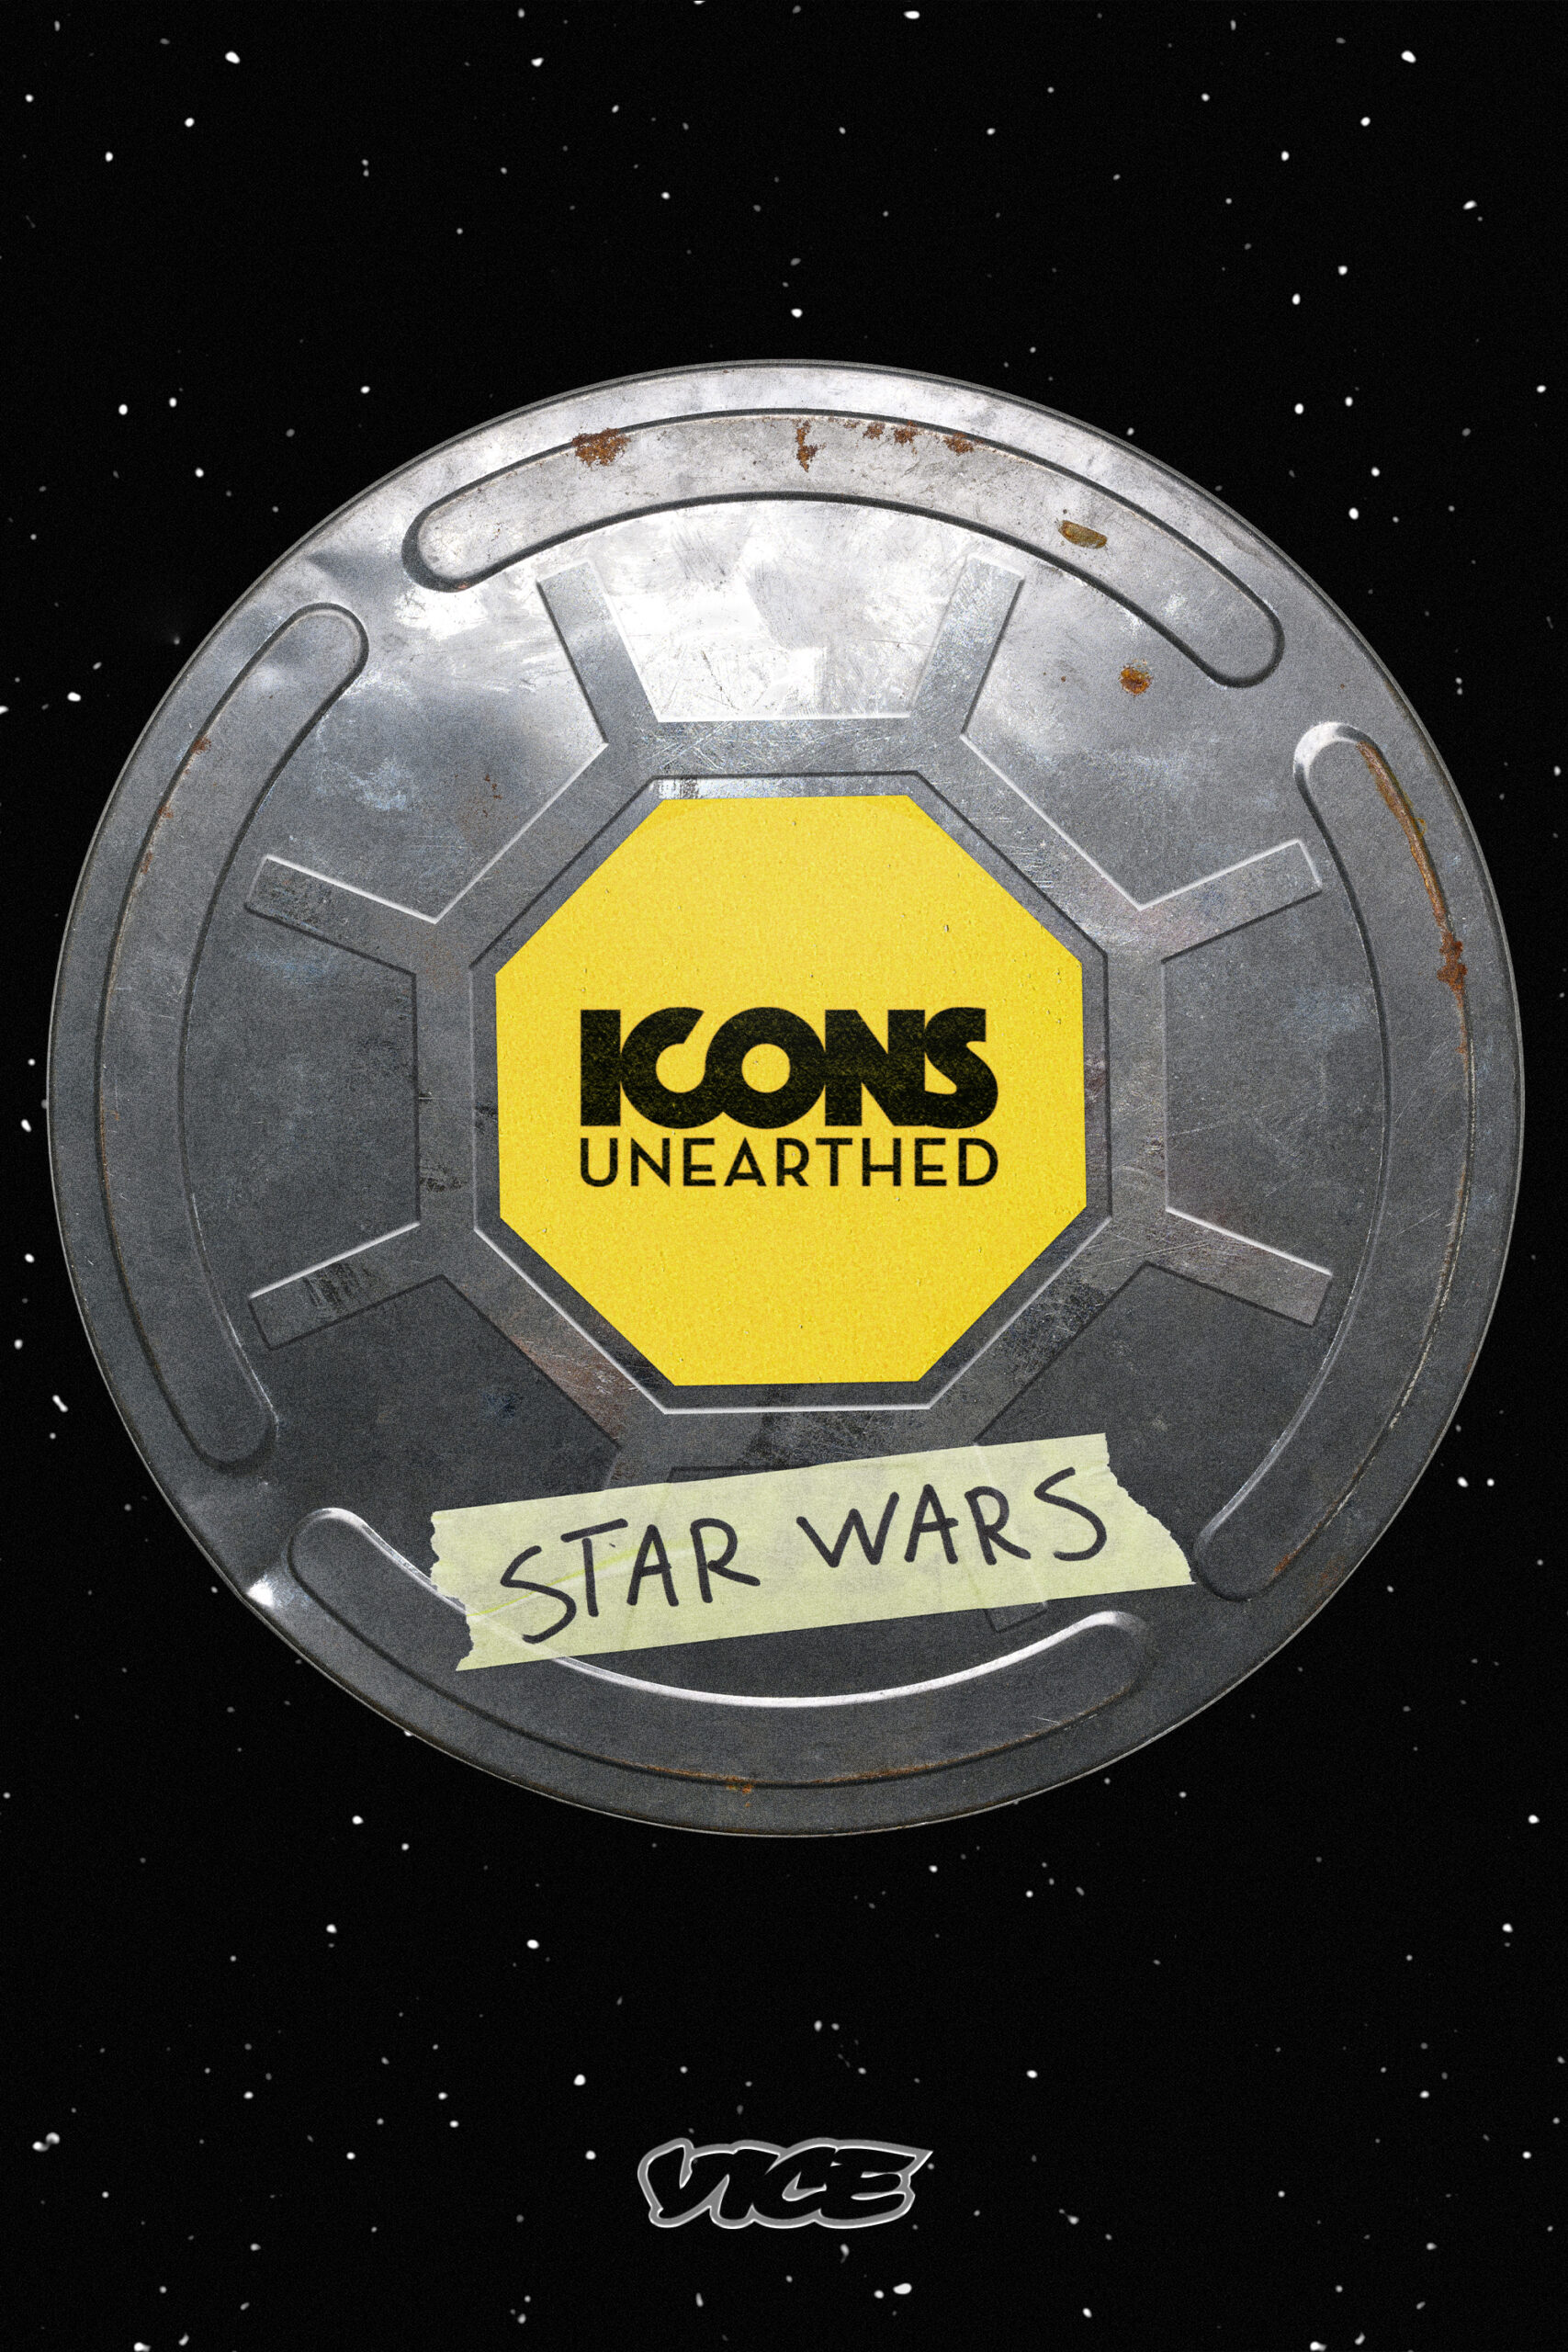 Icons Unearthed: Star Wars Logo